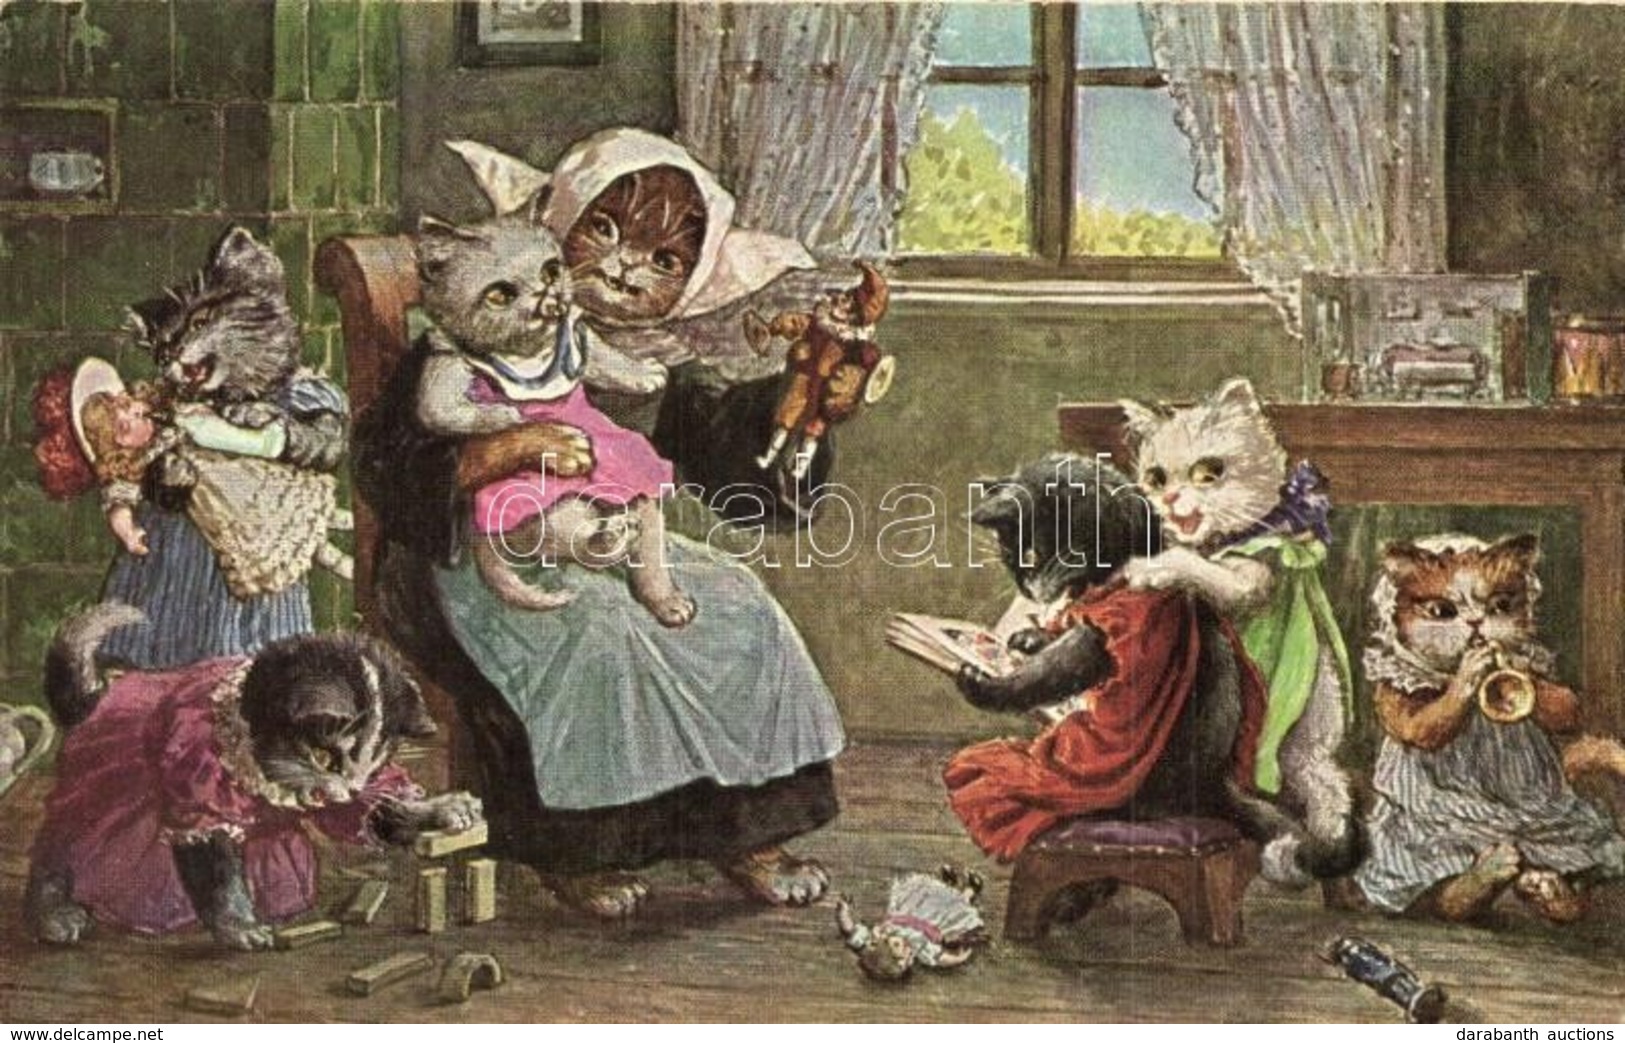 ** T2 Cats Playing With Toys. T. S. N. Serie 1882. (6 Dess.) S: Arthur Thiele - Non Classificati